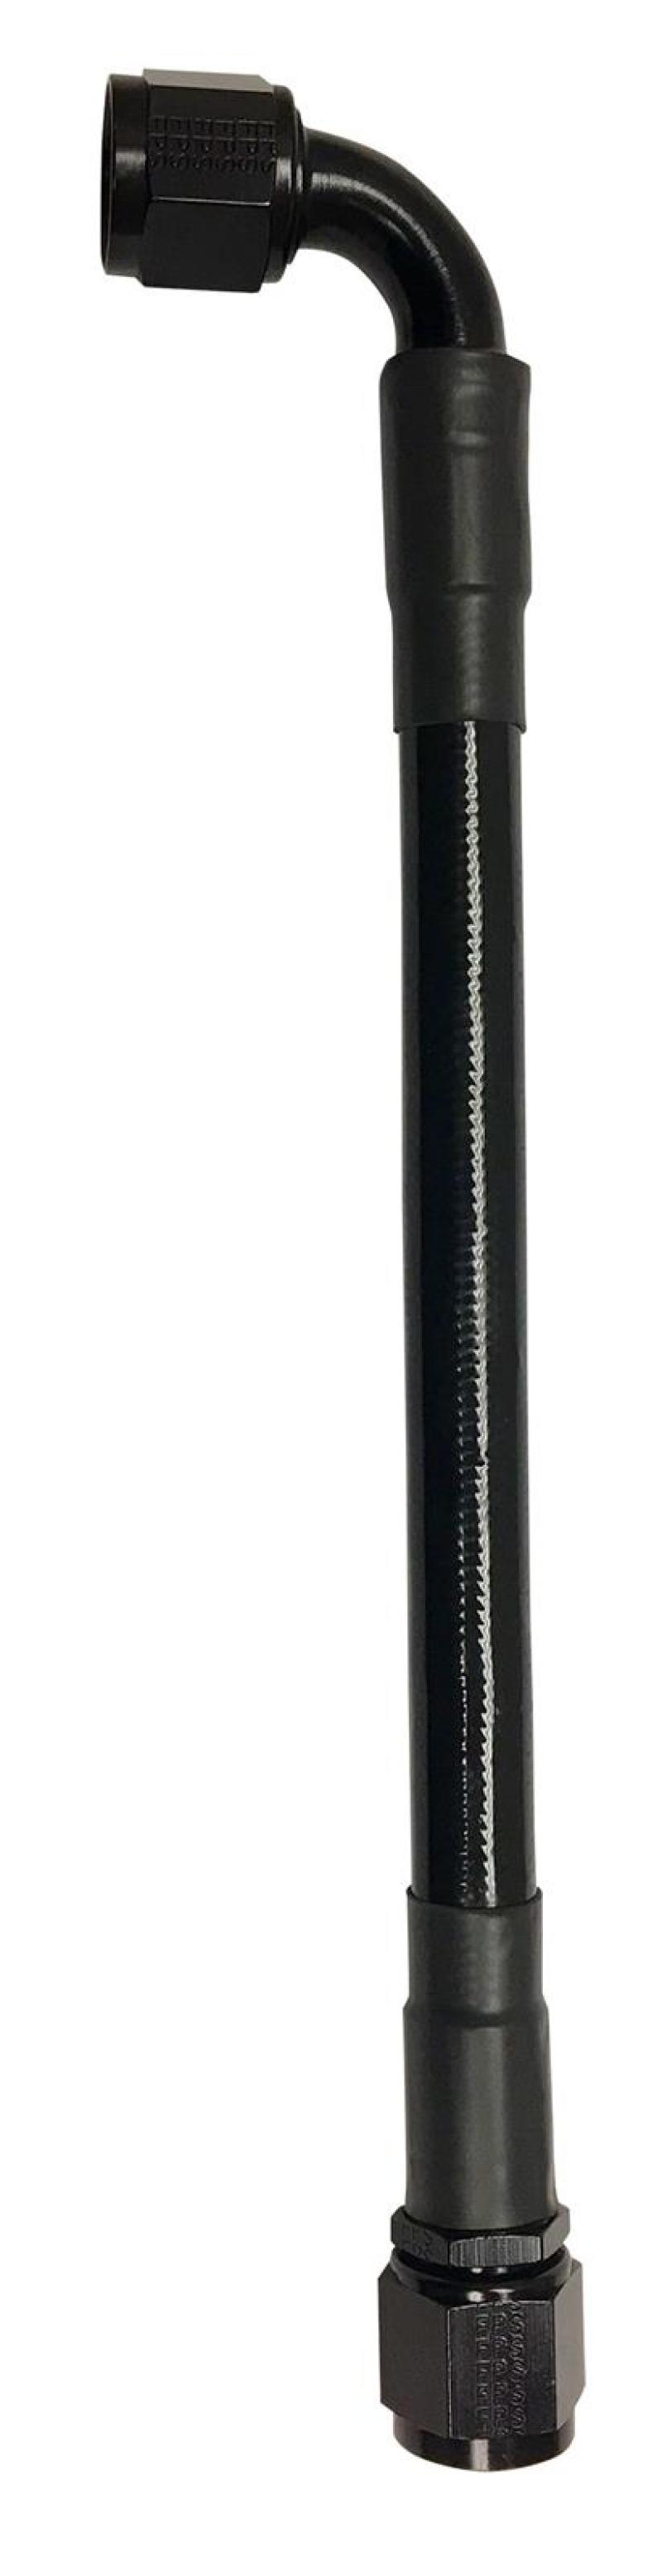 Fragola -6AN Ext Black PTFE Hose Assembly Straight x 90 Degree 96in - 6026-1-2-96BL